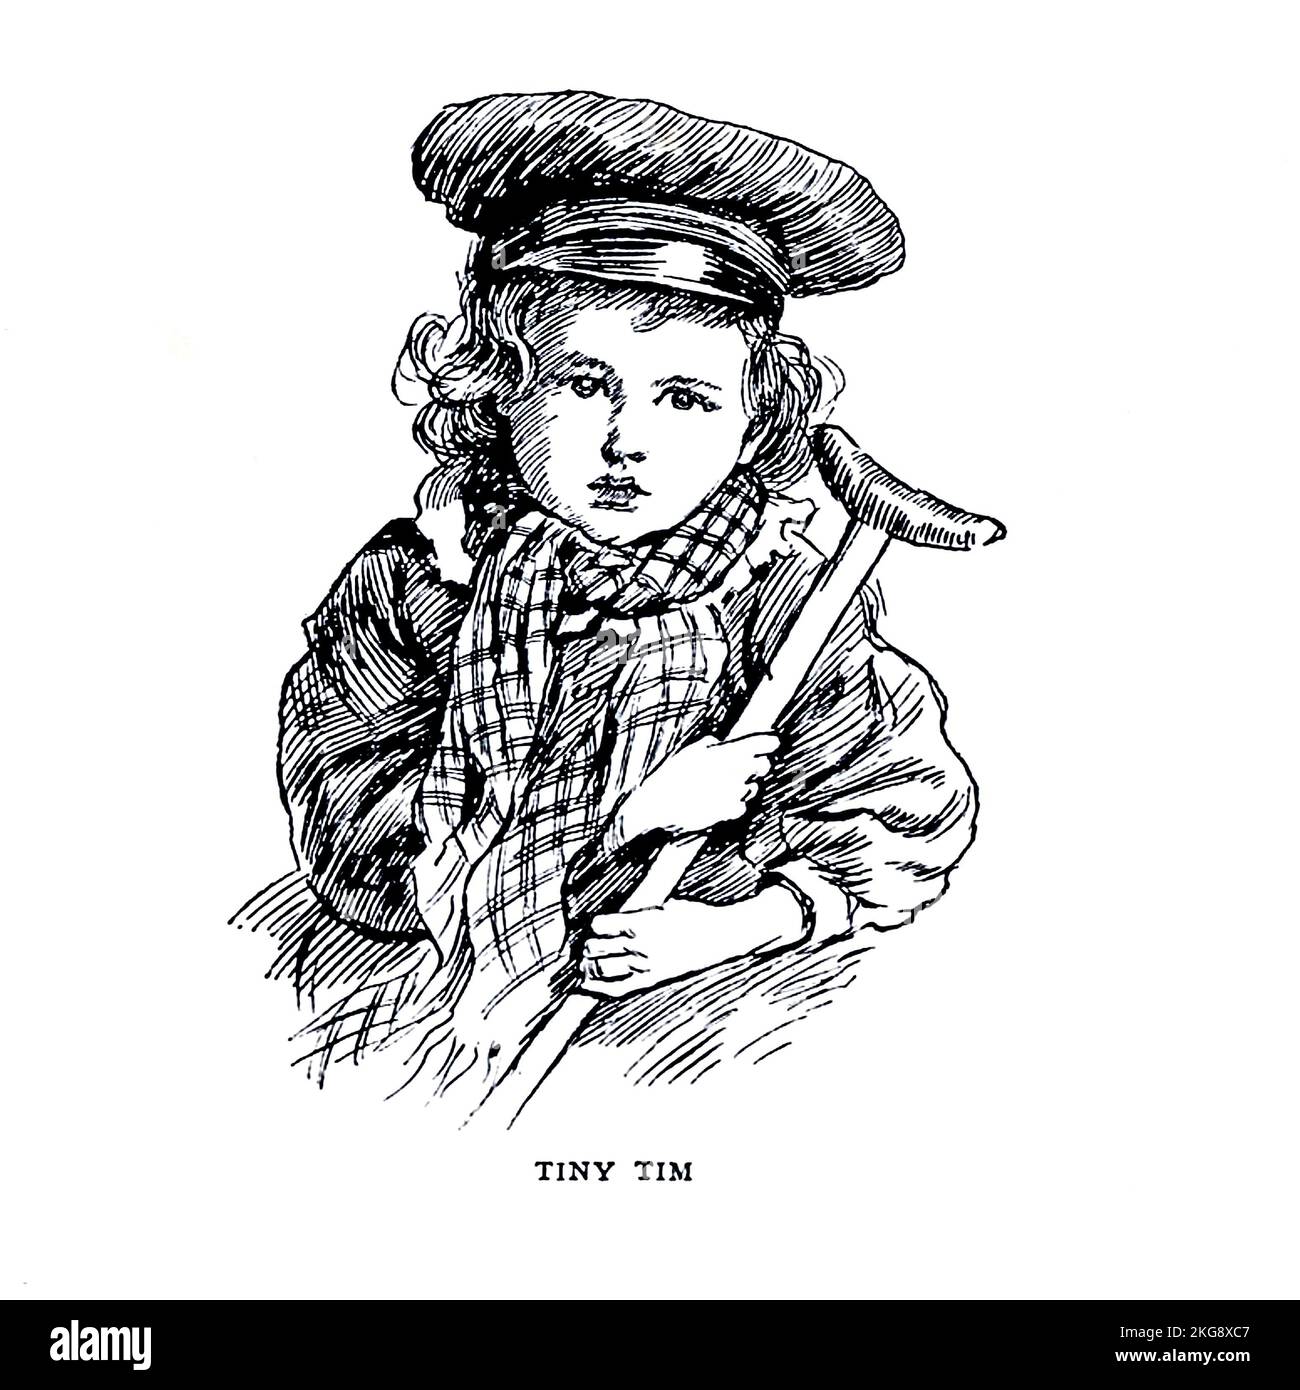 Timothy 'Tiny Tim' Cratchit is a fictional character from the 1843 novella A Christmas Carol by Charles Dickens. from the book Dickens' dream children by Mary Angela Dickens (Charles Dickens granddaughter) and illustrated by Harold Copping Published 1900 by Raphael Tuck and Sons London Stock Photo